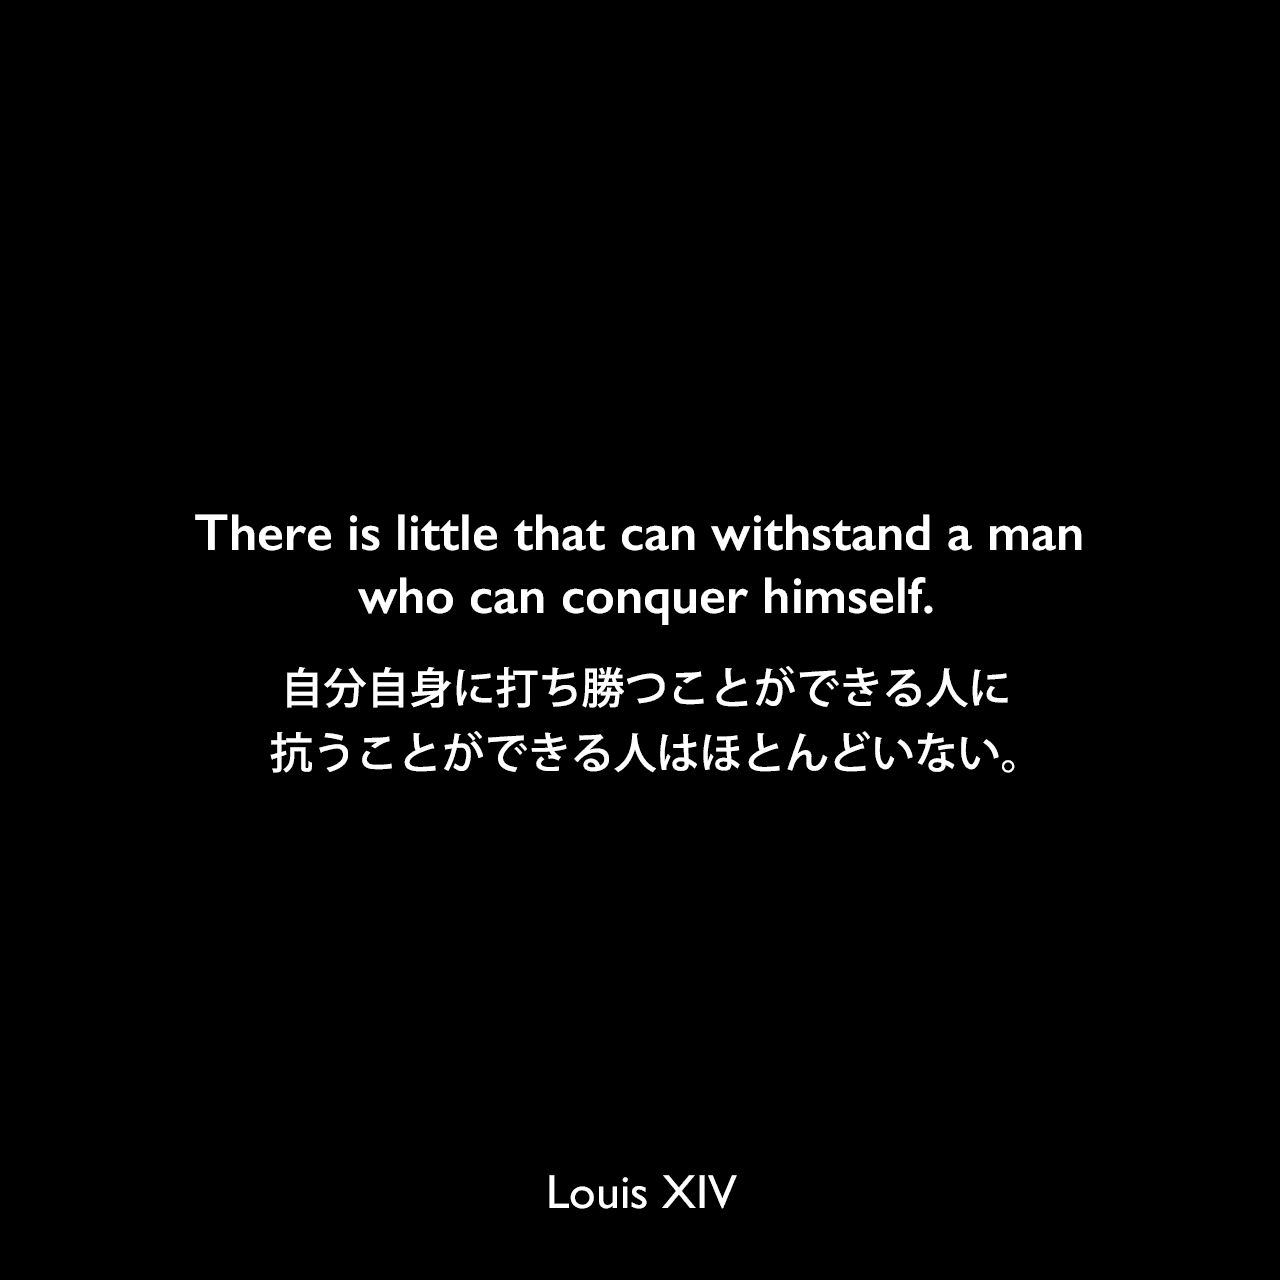 There is little that can withstand a man who can conquer himself.自分自身に打ち勝つことができる人に抗うことができる人はほとんどいない。Louis XIV